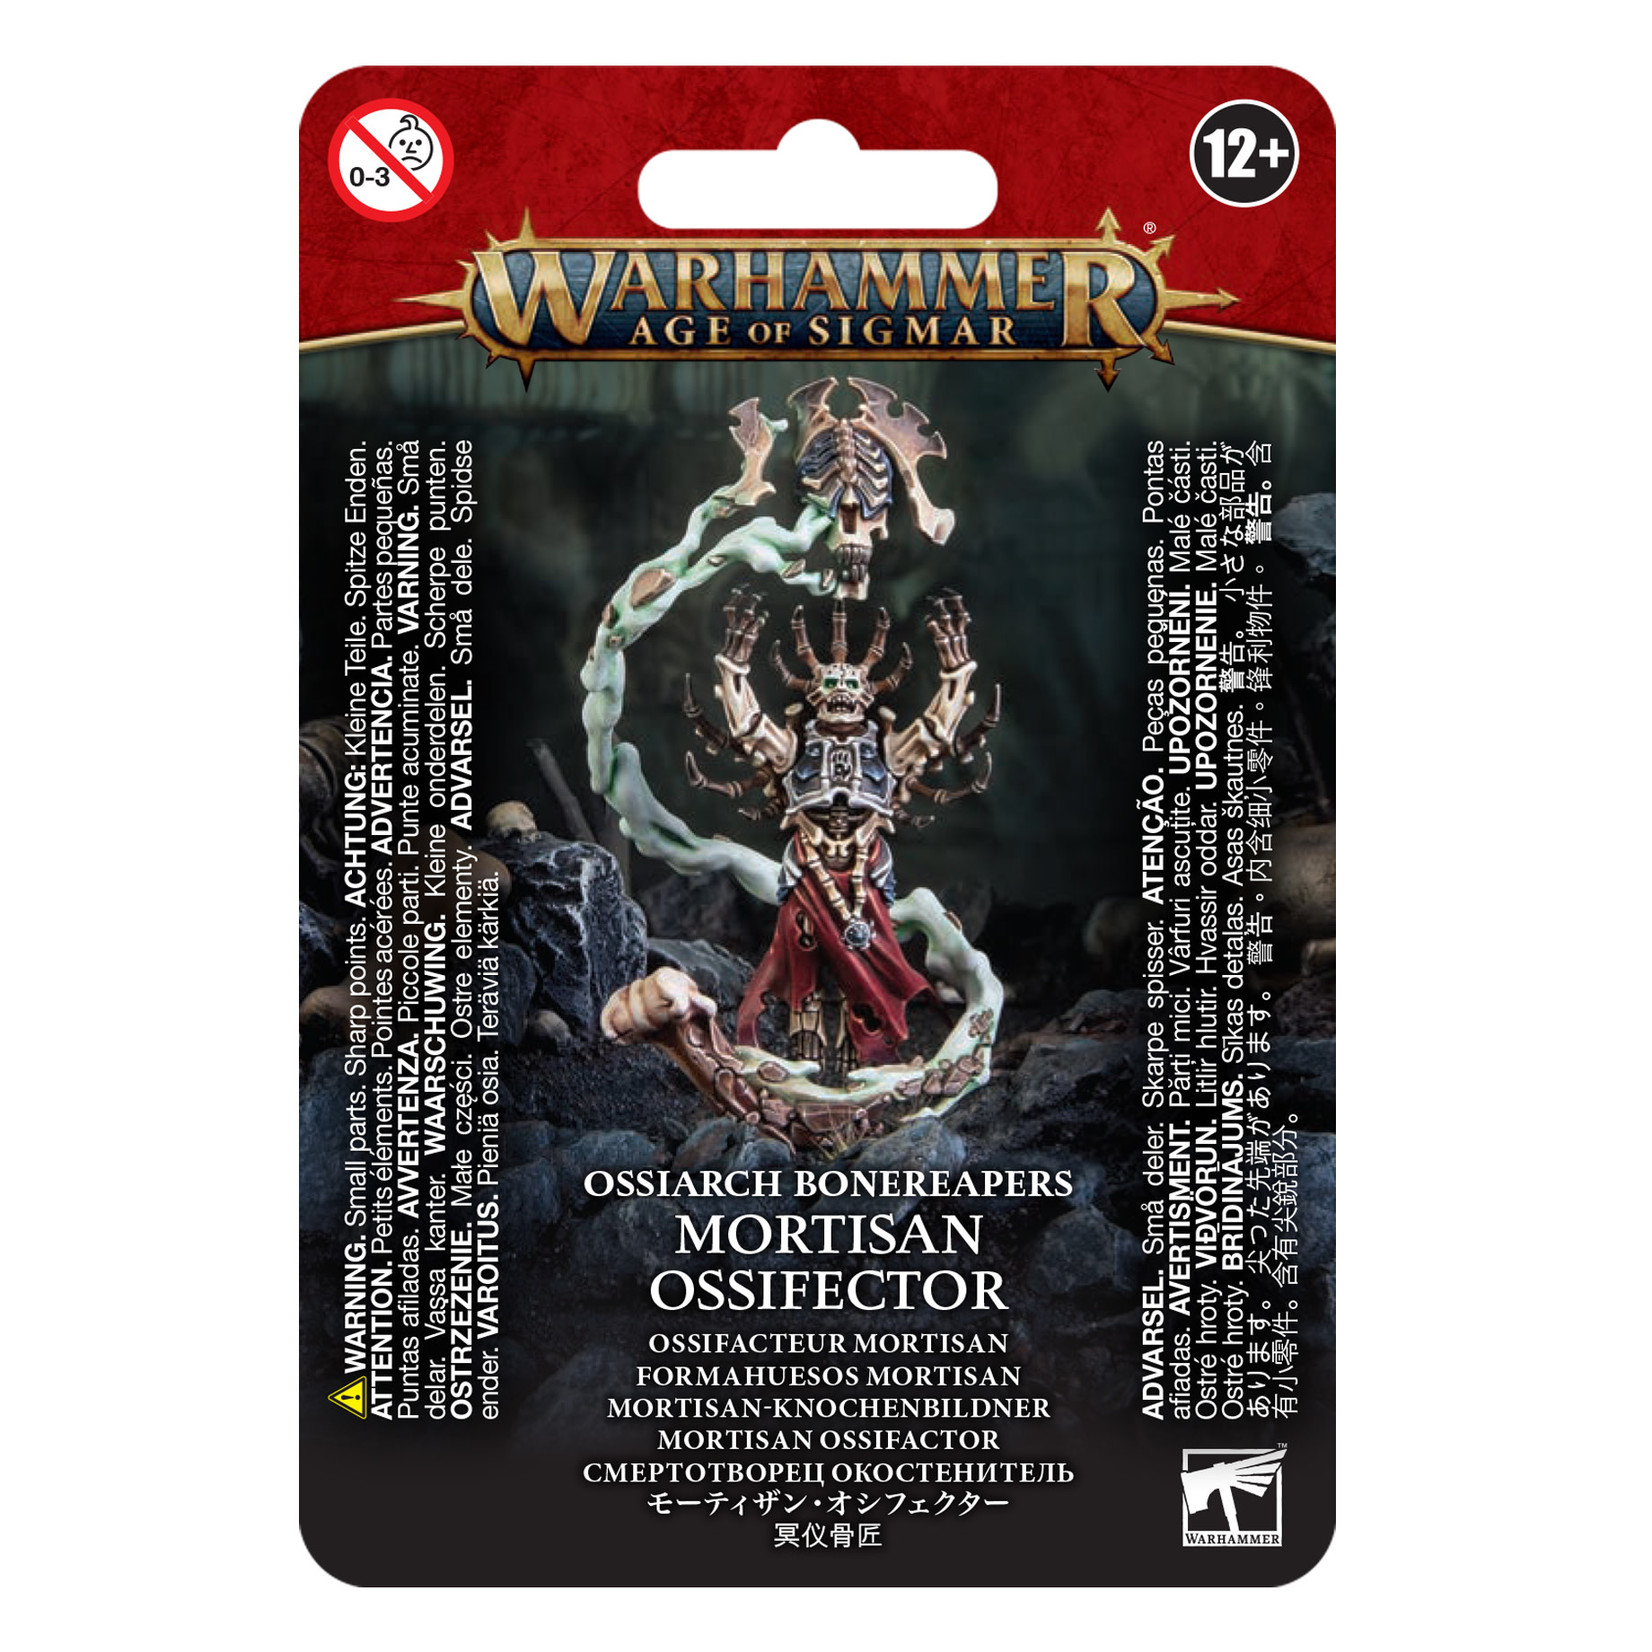 Games Workshop Warhammer Age of Sigmar Death Ossiarch Bonereapers Mortisan Ossifector